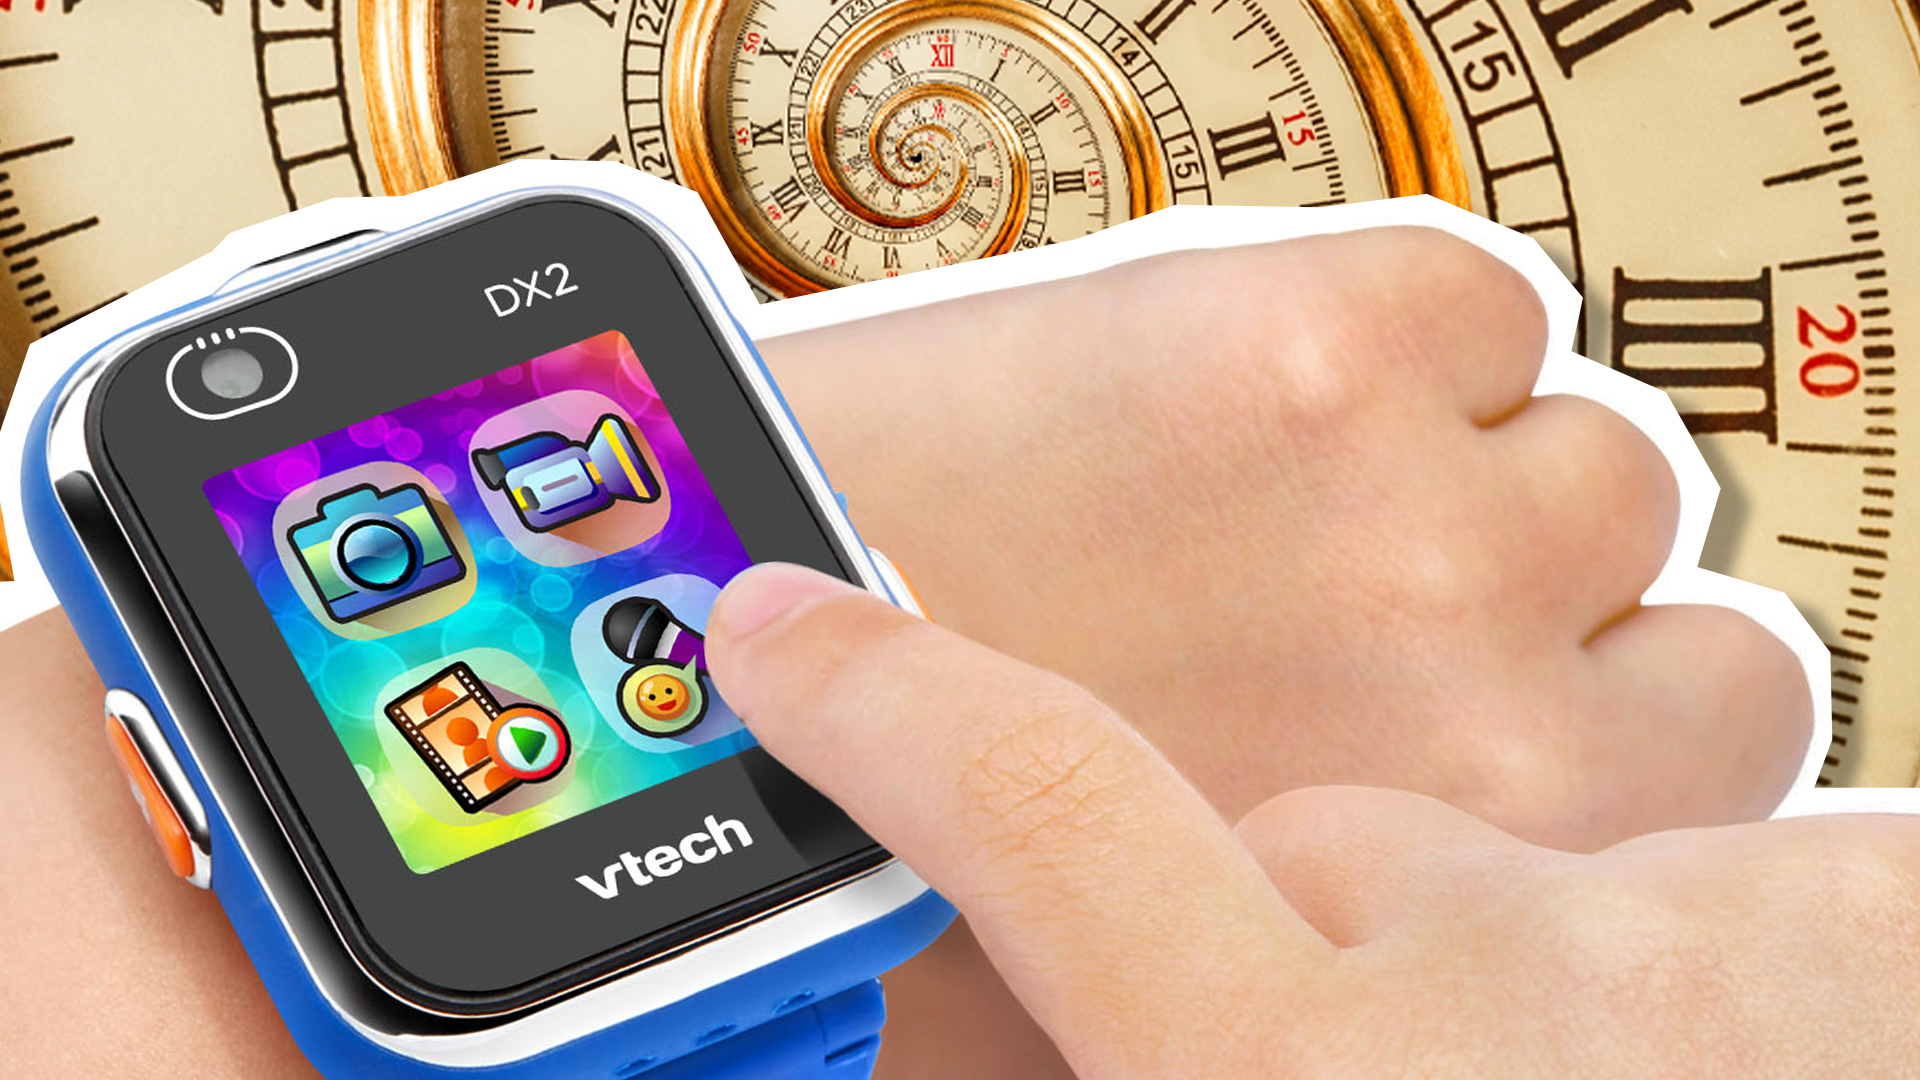 A close up of the VTech smartphone